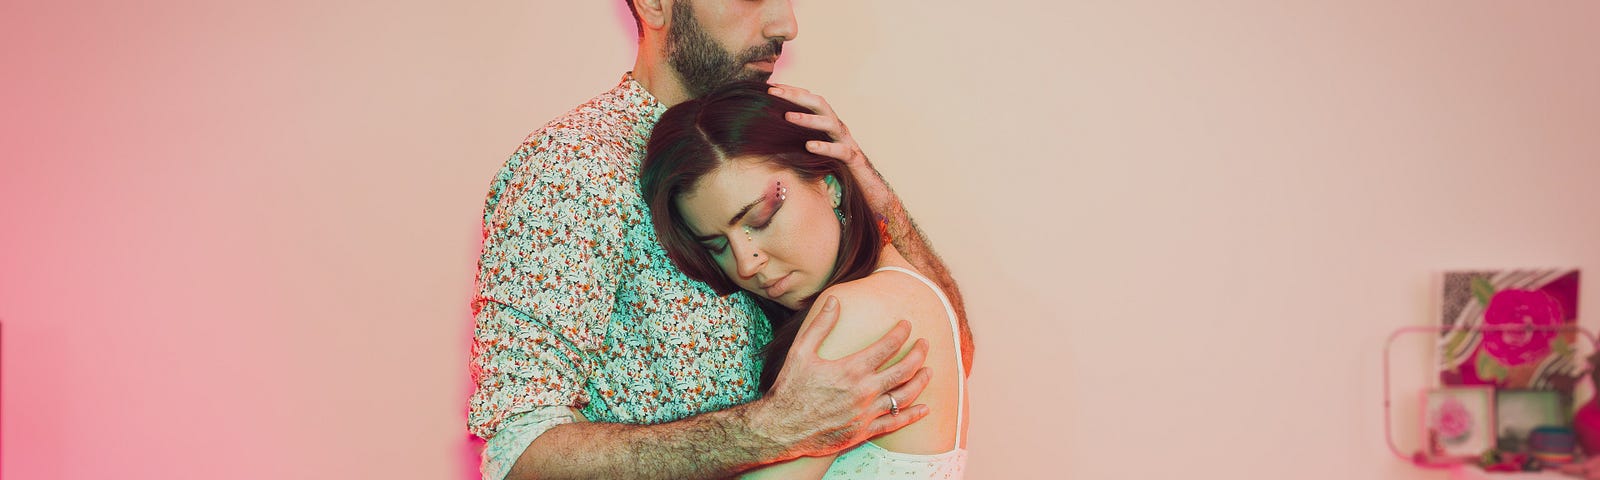 a woman, the author, relaxes in the embrace of a man, her partner.